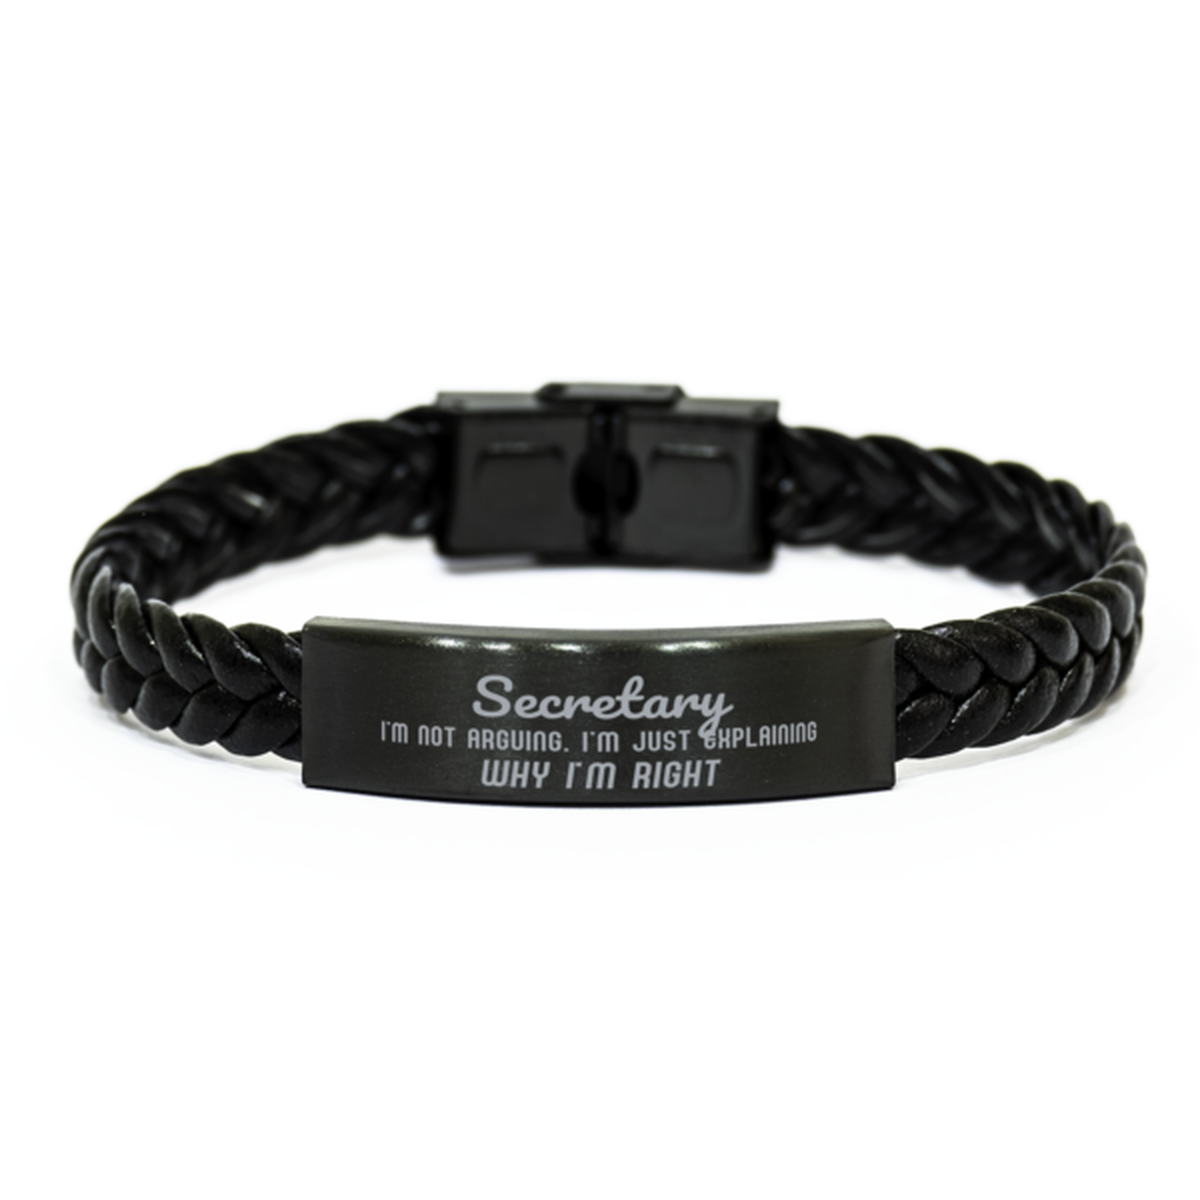 Secretary I'm not Arguing. I'm Just Explaining Why I'm RIGHT Braided Leather Bracelet, Graduation Birthday Christmas Secretary Gifts For Secretary Funny Saying Quote Present for Men Women Coworker